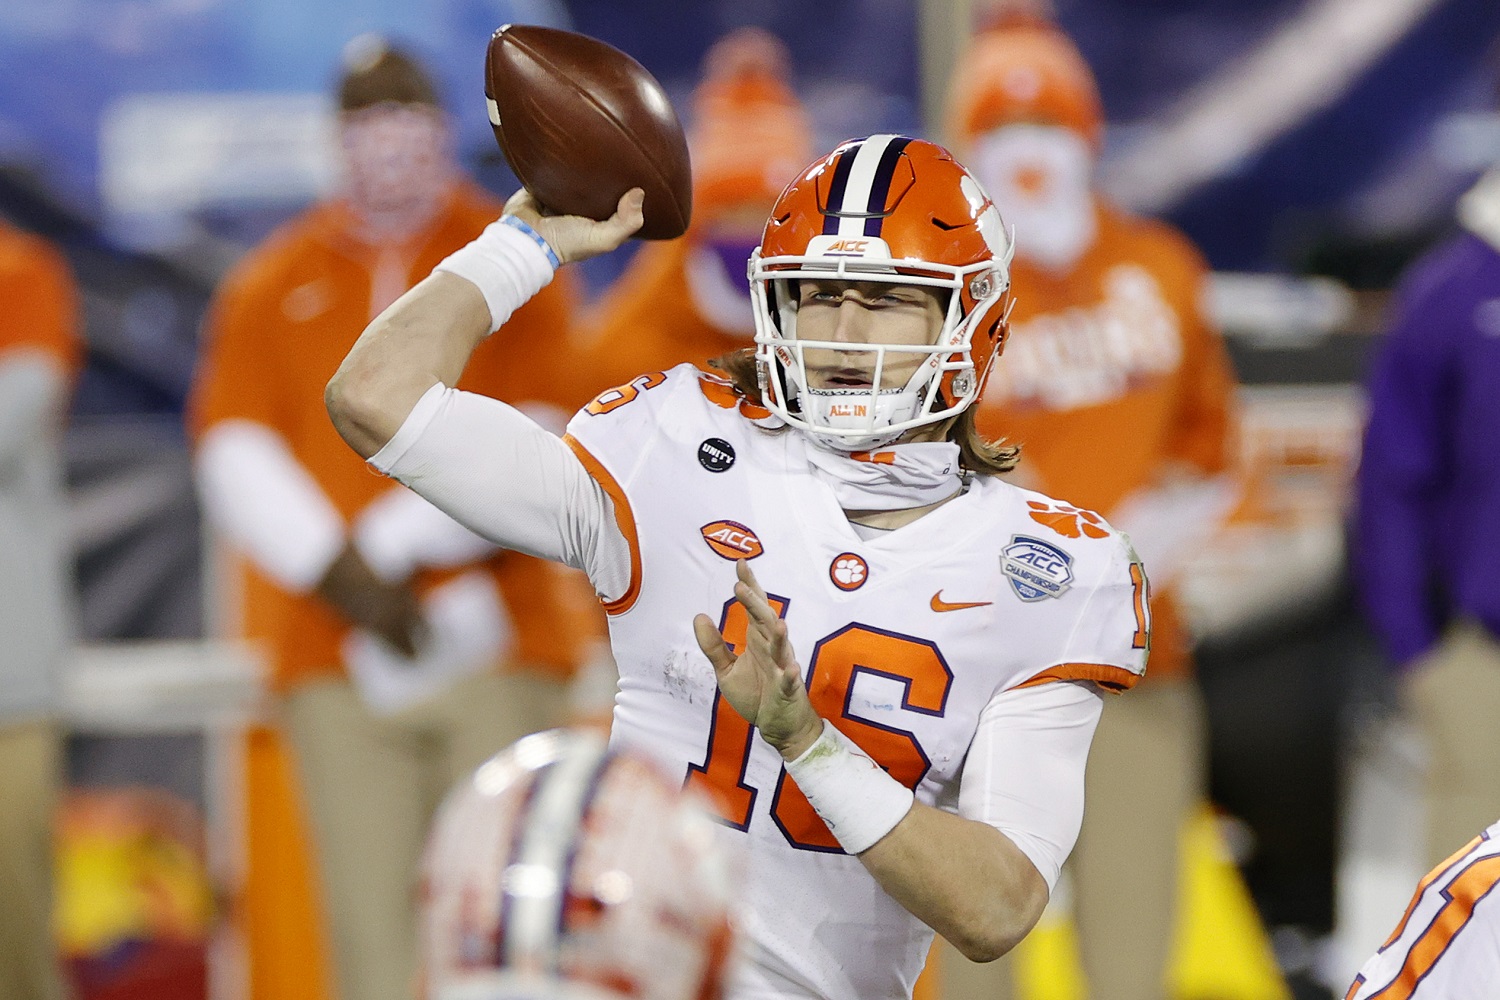 Quarterback Trevor Lawrence of Clemson has a busy month of April ahead, beginning with his wedding on April 10 and then his likely selection as the top pick of the NFL draft on April 29. | Jared C. Tilton/Getty Images